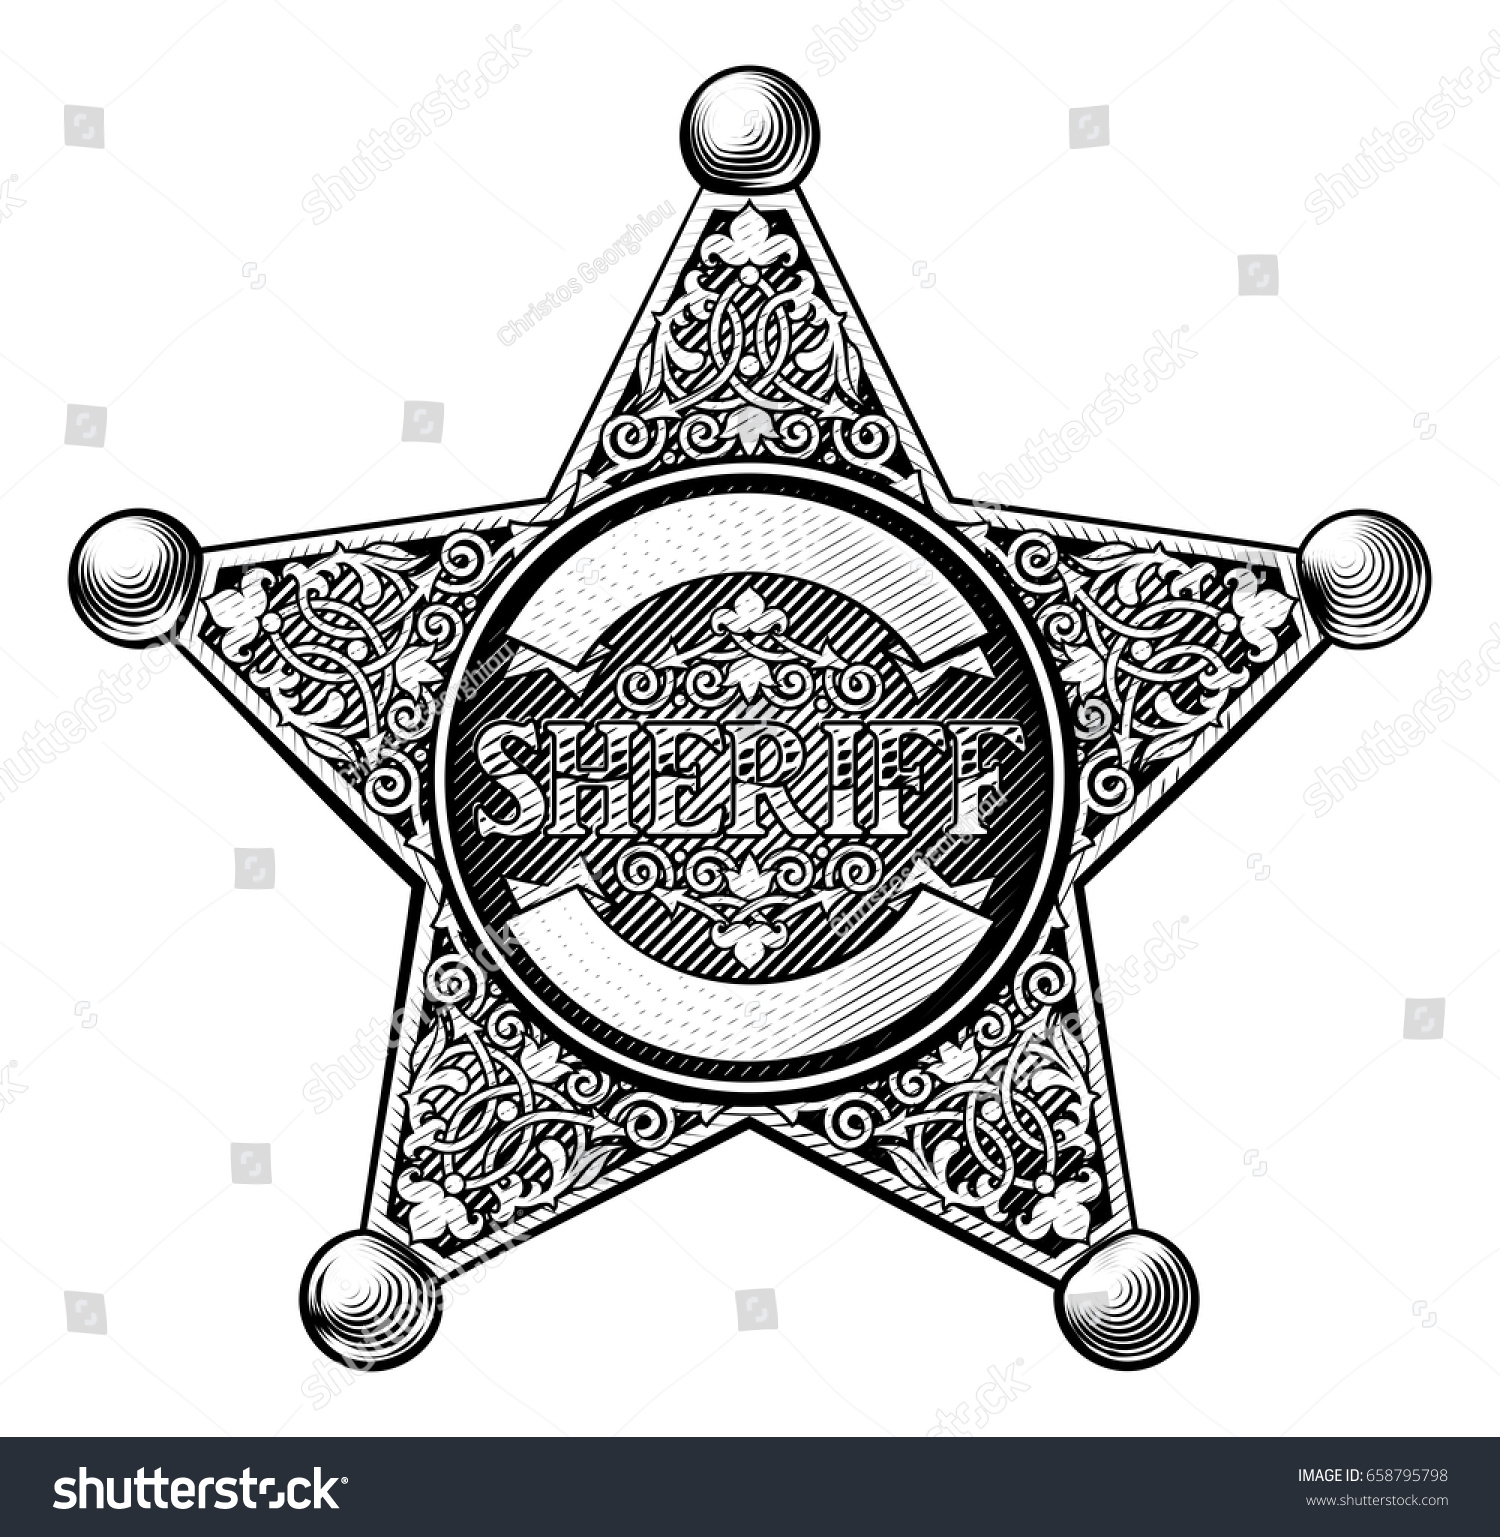 SVG of Sheriff badge star in a vintage etched engraved style svg